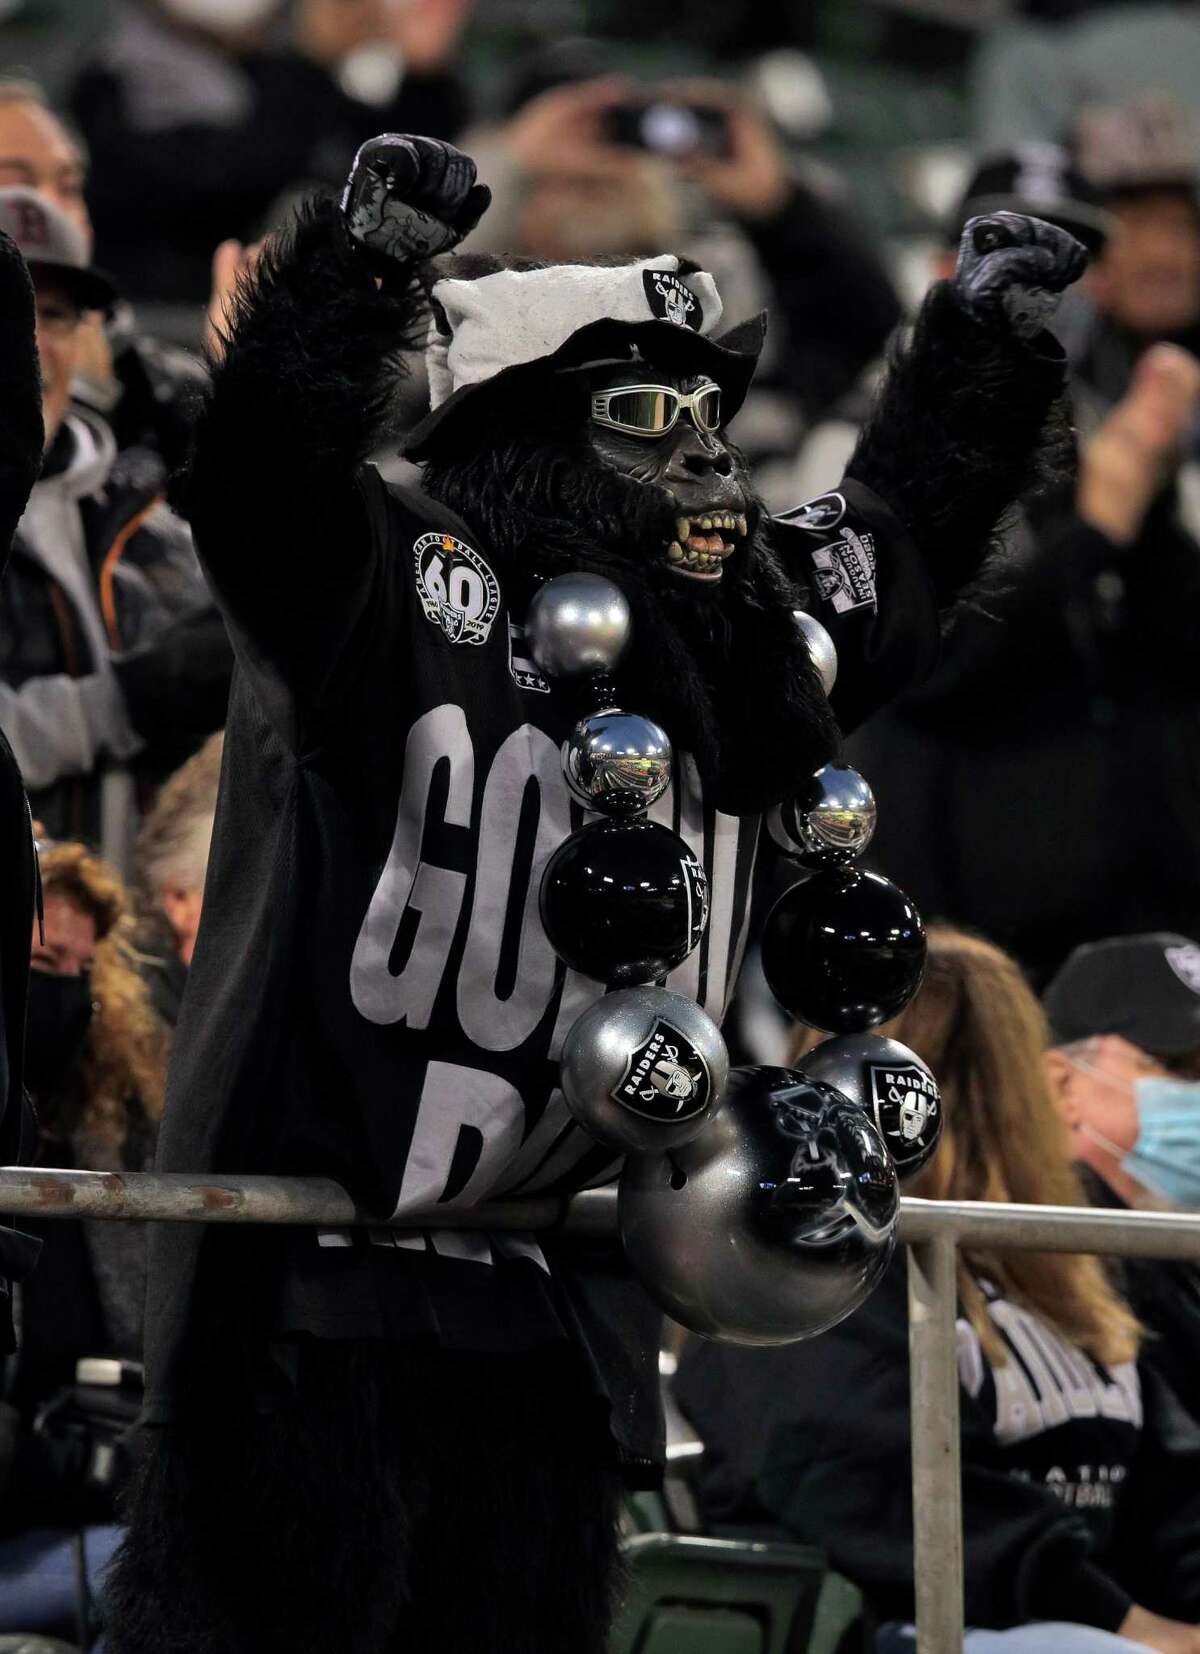 Gorilla Rilla cheers during a public memorial for legendary former Raiders head coach and television announcer John Madden at the Coliseum in Oakland, Calif., on Monday, February 14, 2022. Madden, a Bay Area native, died in December.